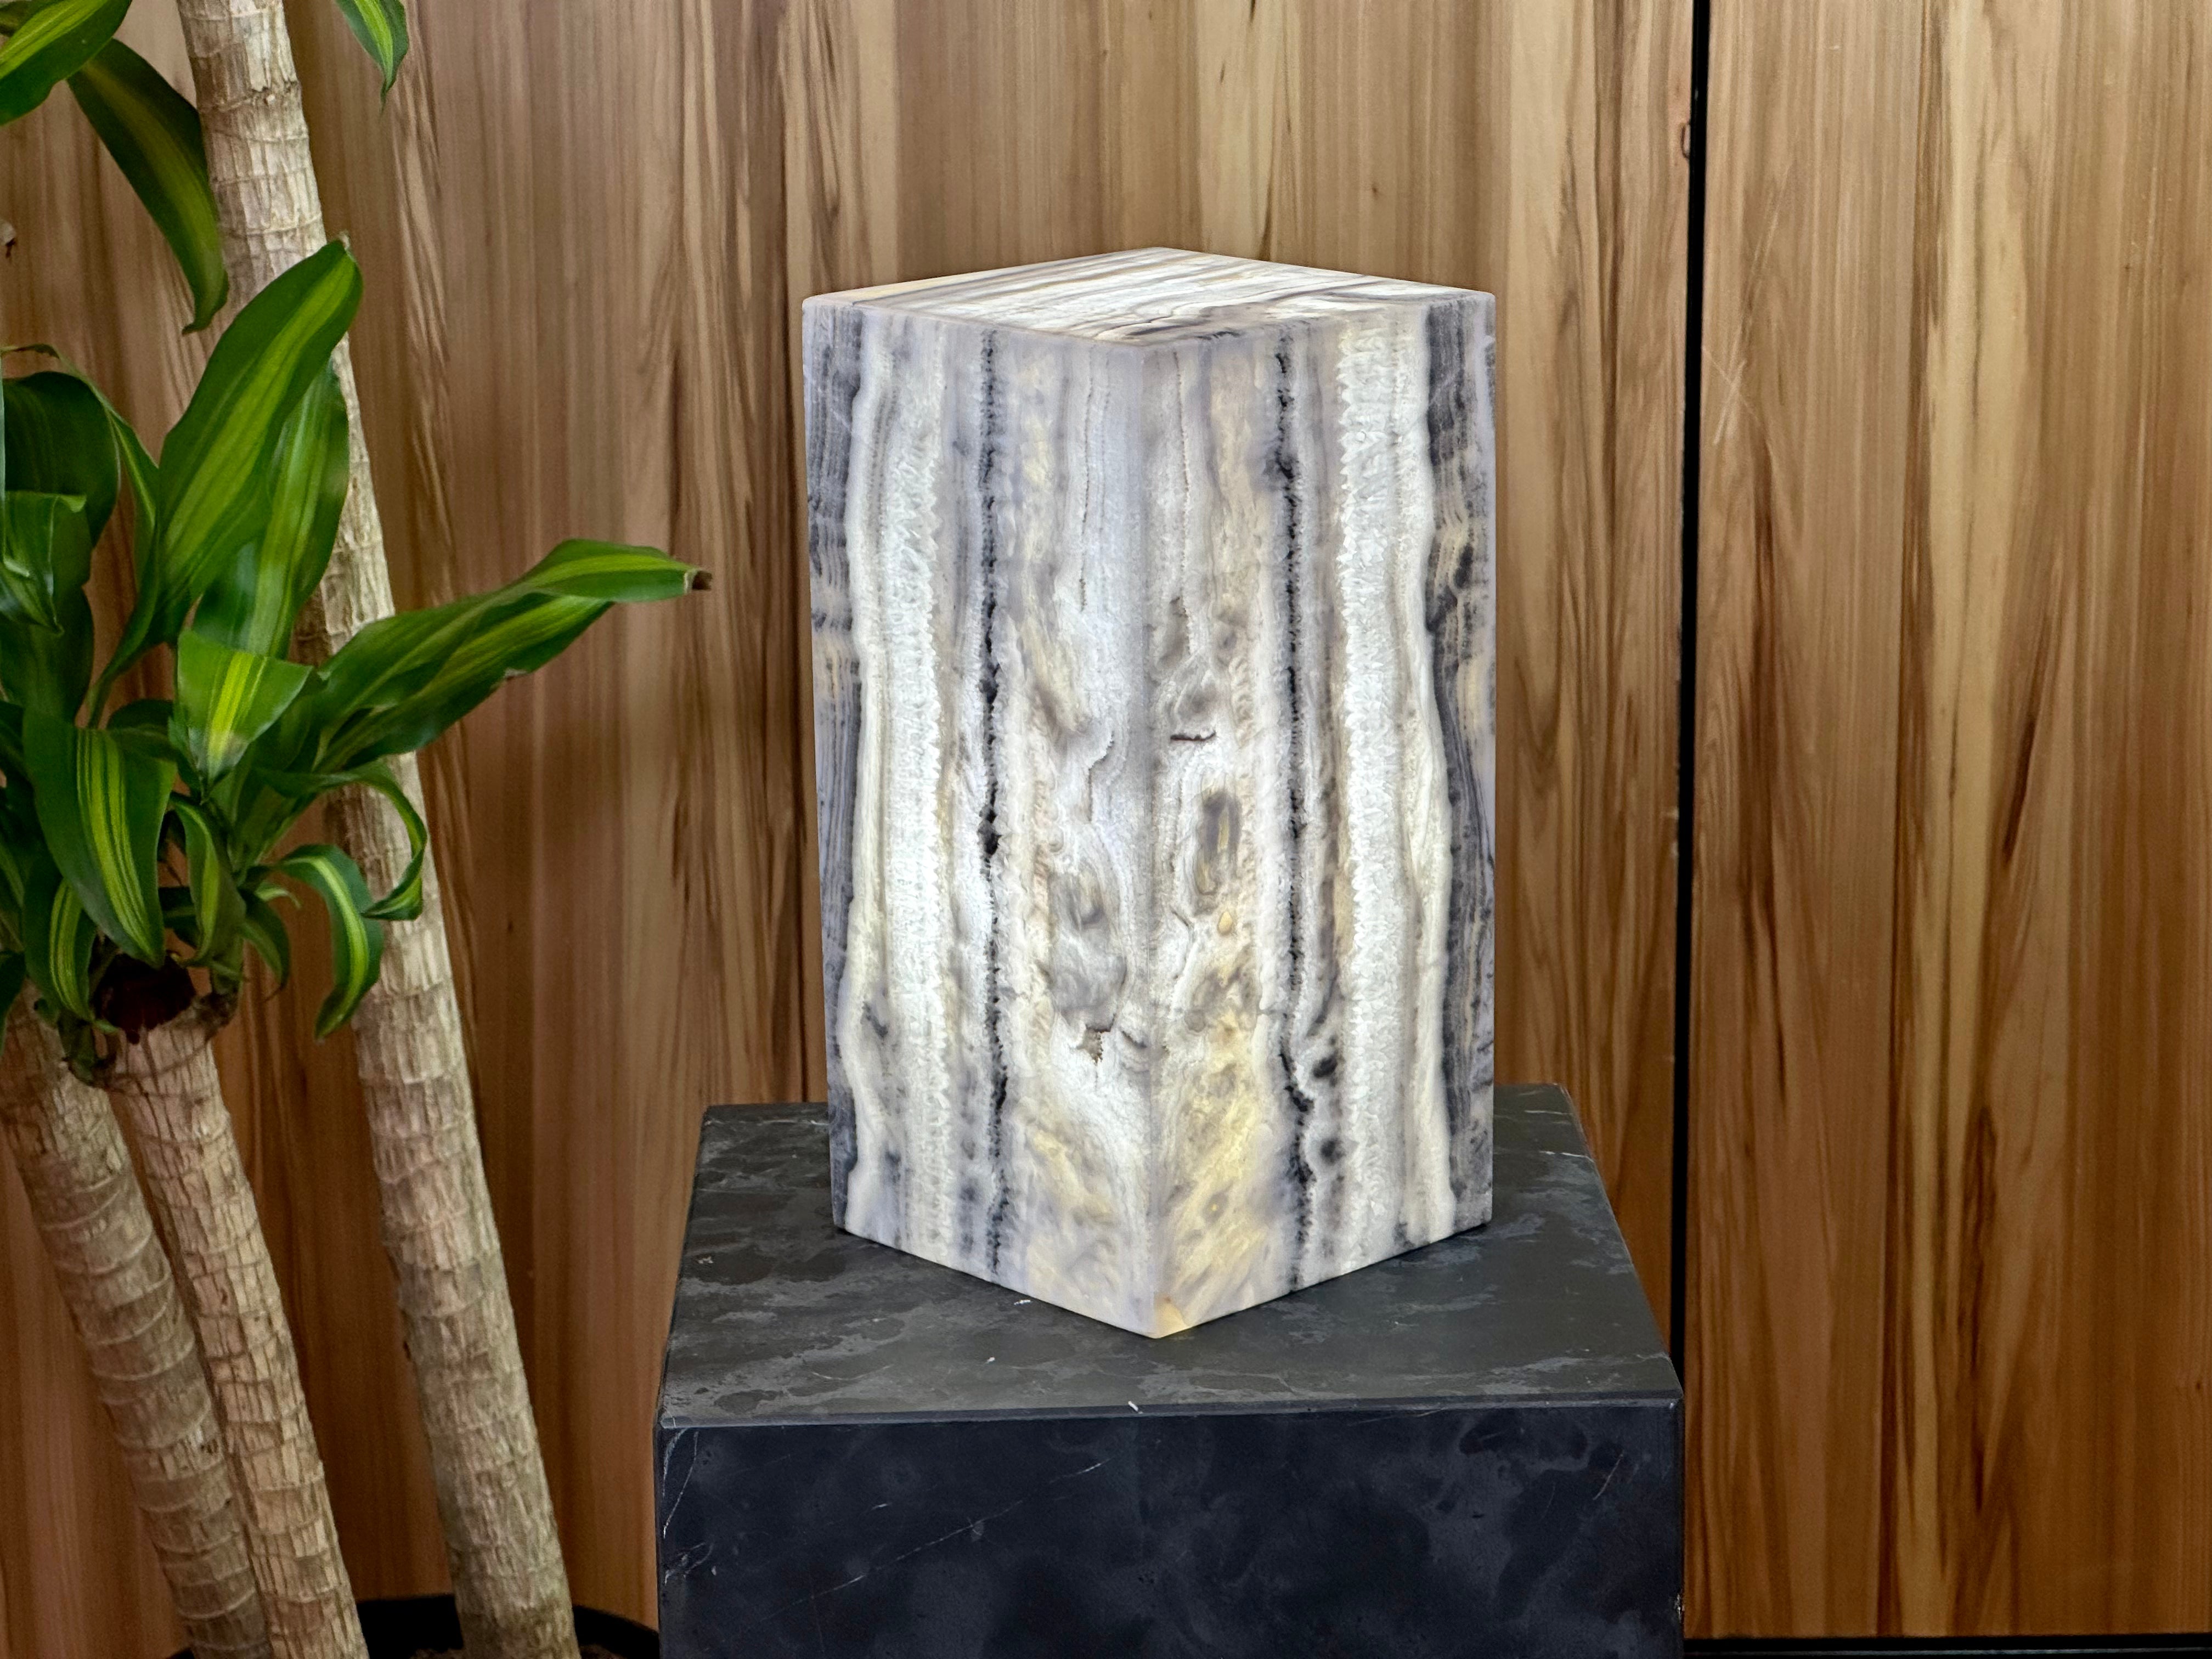 Designer Stone Lamps for Home Decor - Elevate your interior decor with handcrafted onyx lamps perfect for bedroom, living room or office